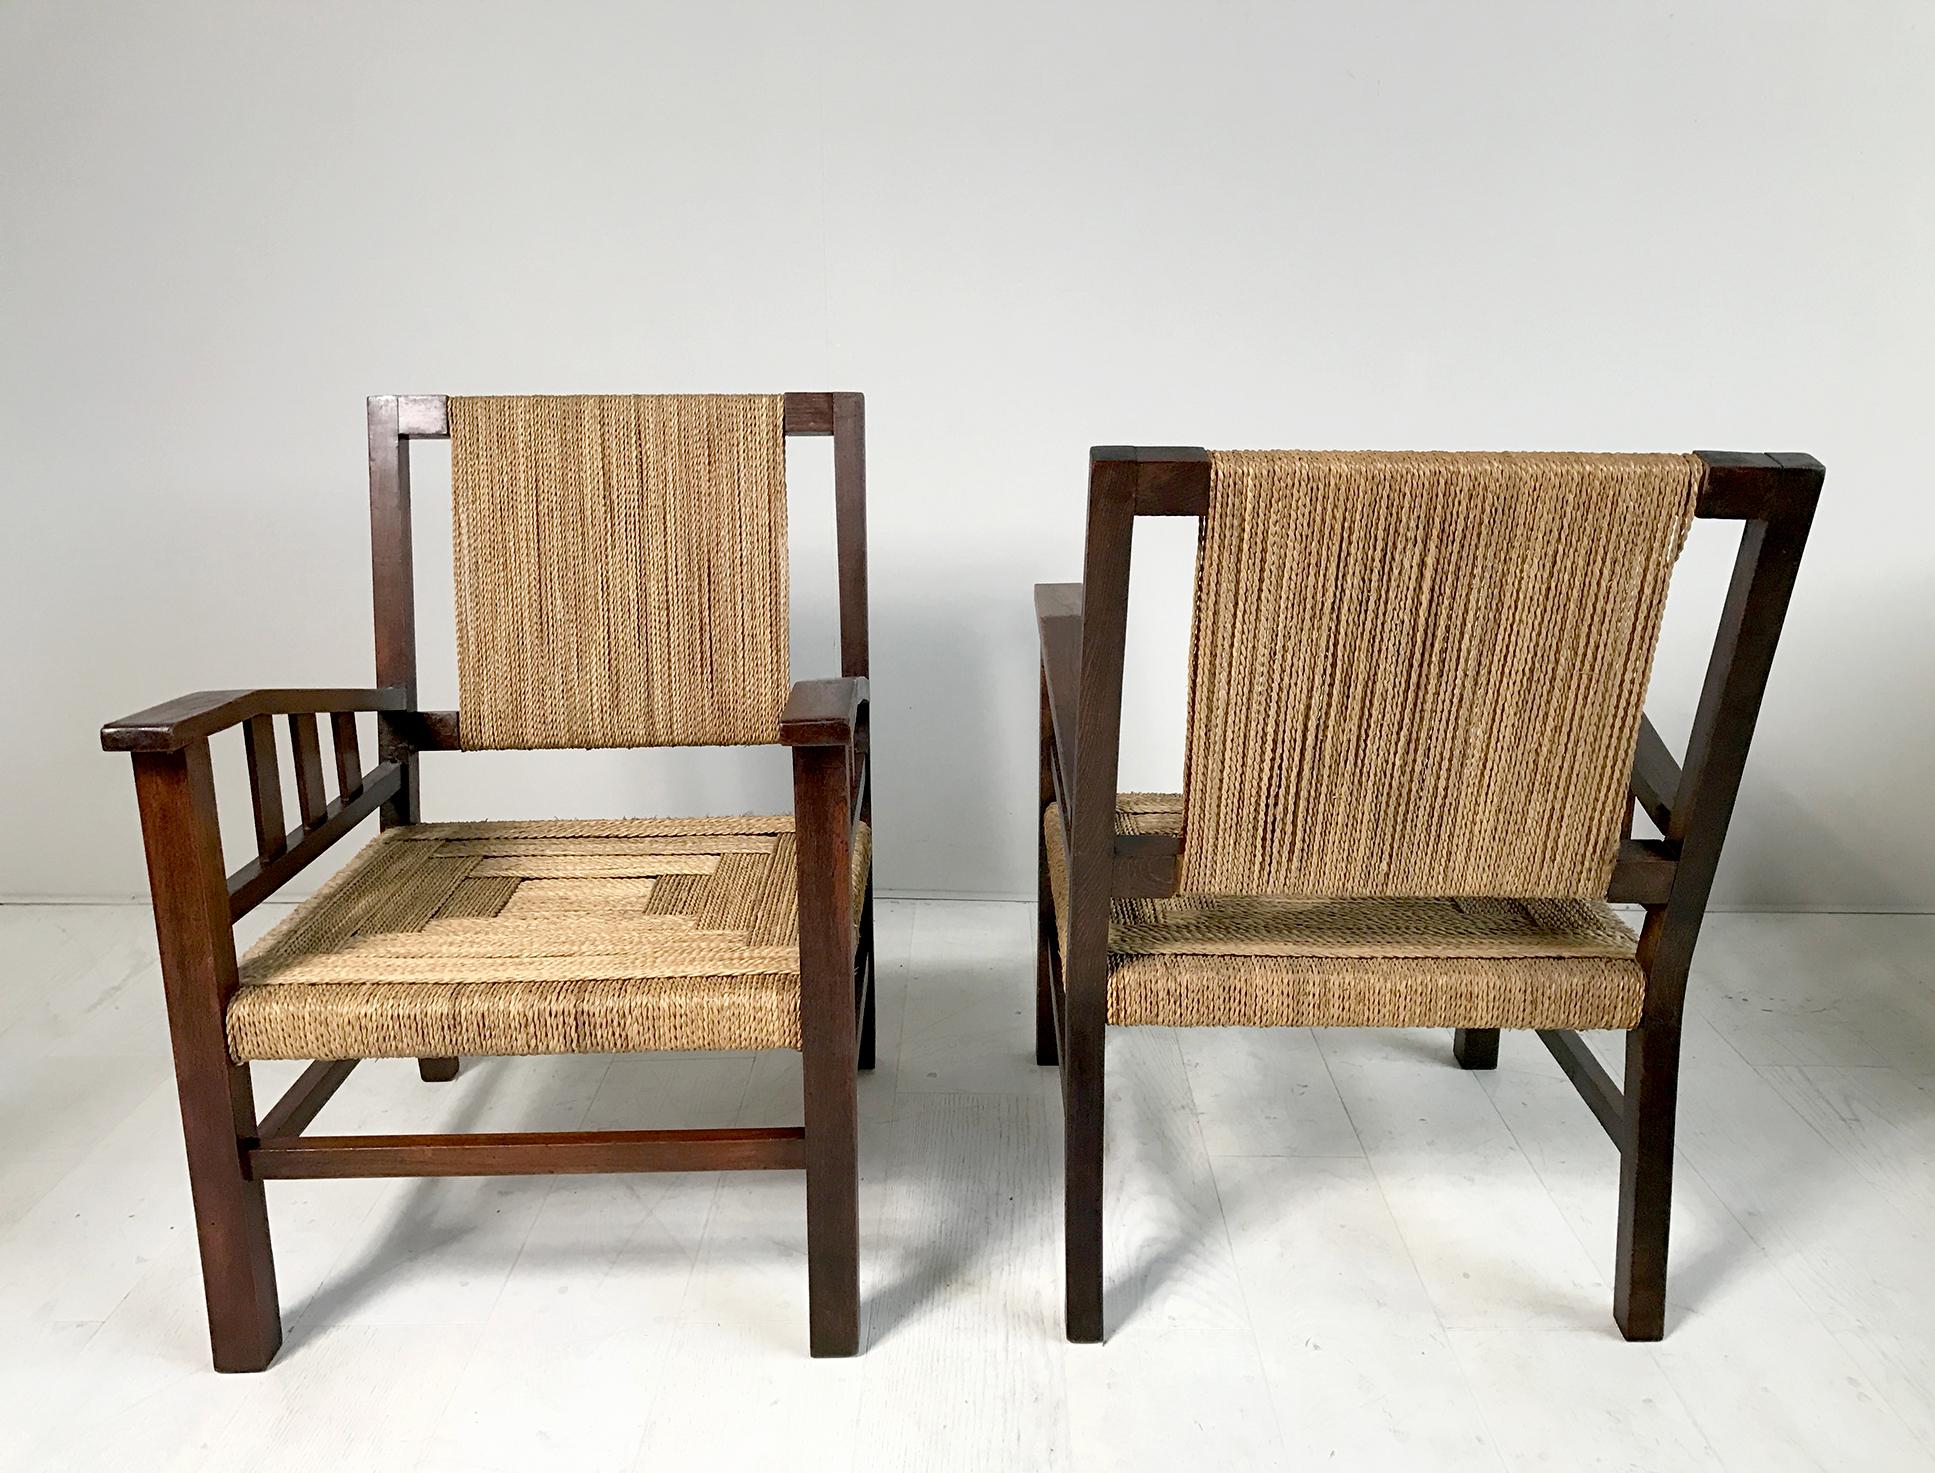 Rope Francis Jourdain, Pair of Armchairs, France, 1930